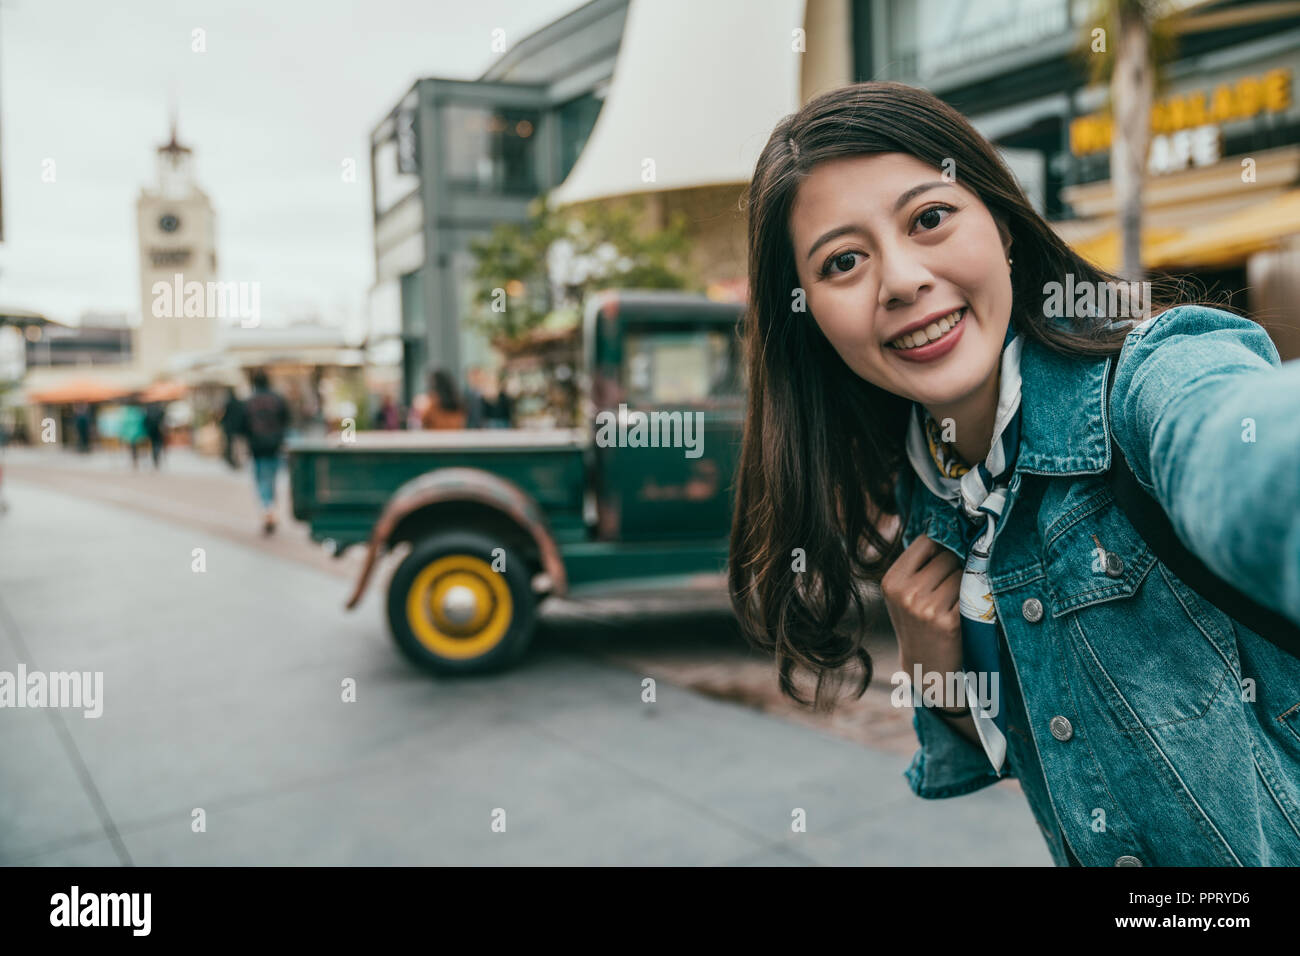 pretty tourist taking selfie, full of happiness on her face, she is telling how wonderful the journey is Stock Photo